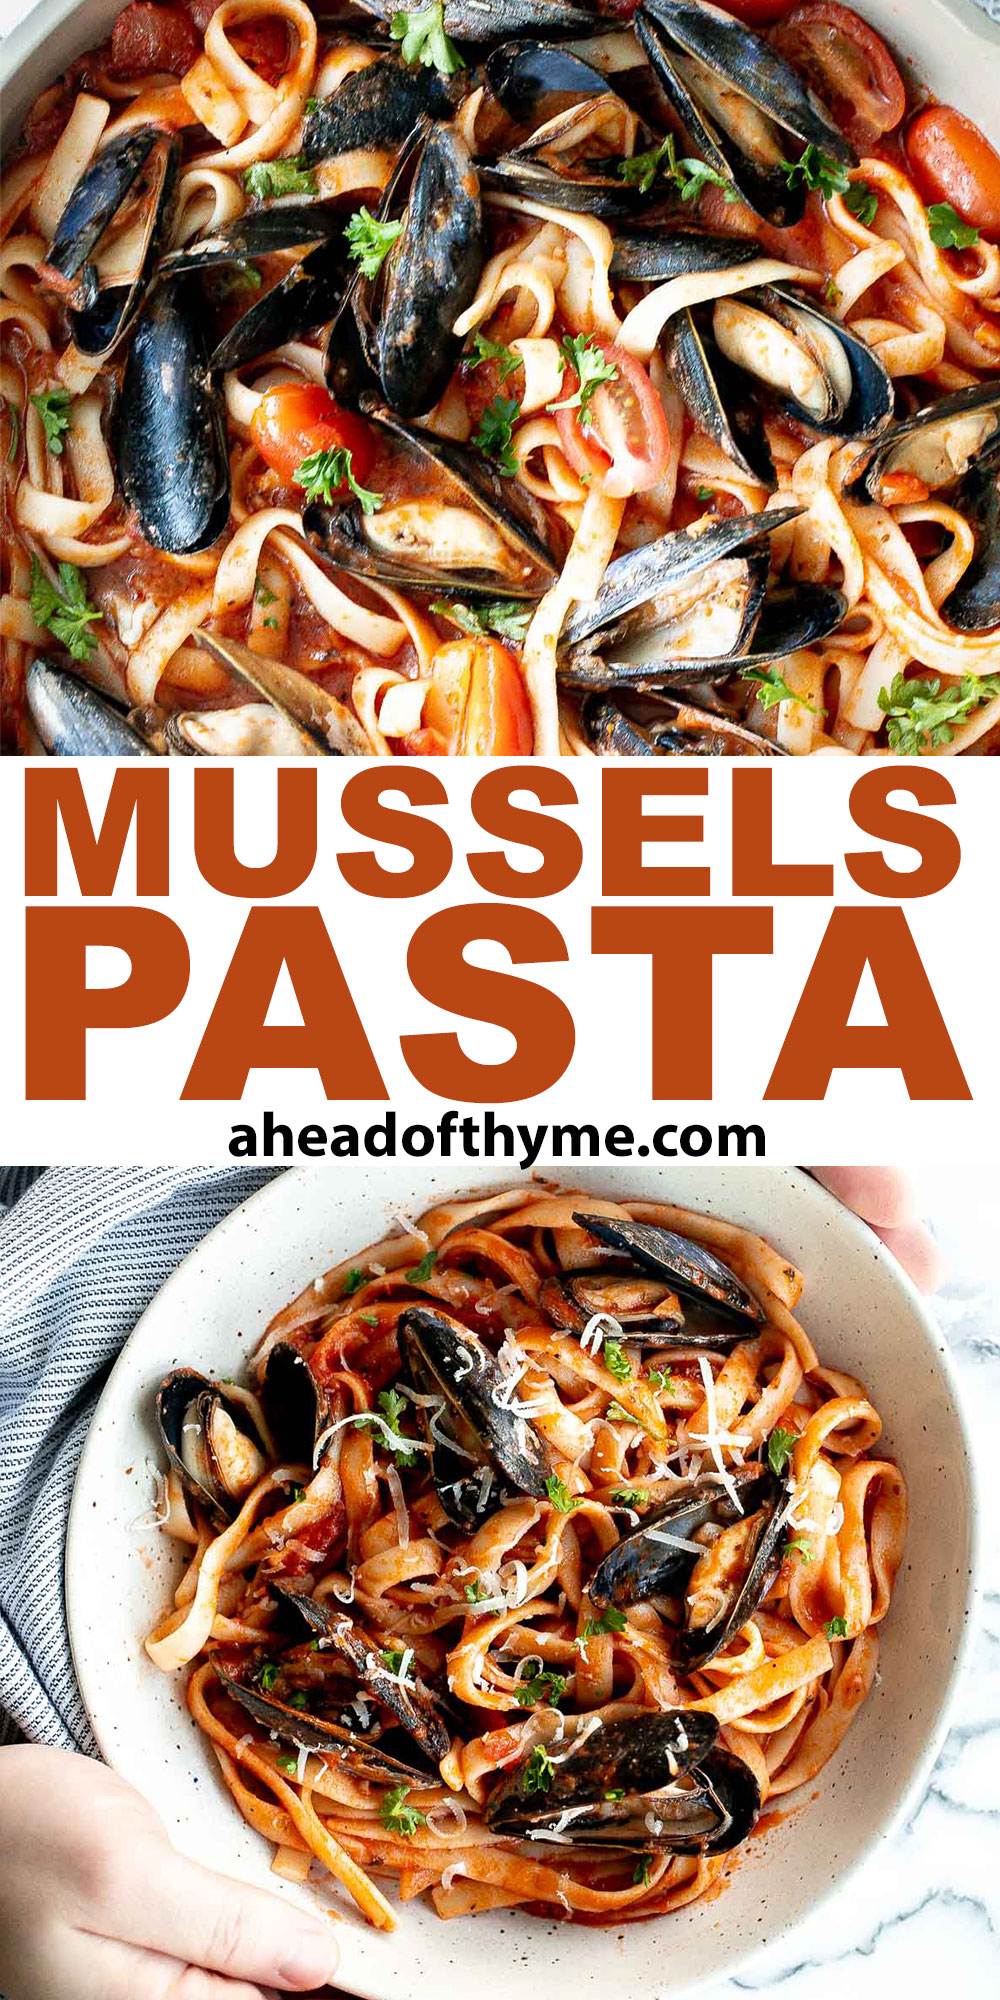 Mussels Pasta in Tomato Sauce